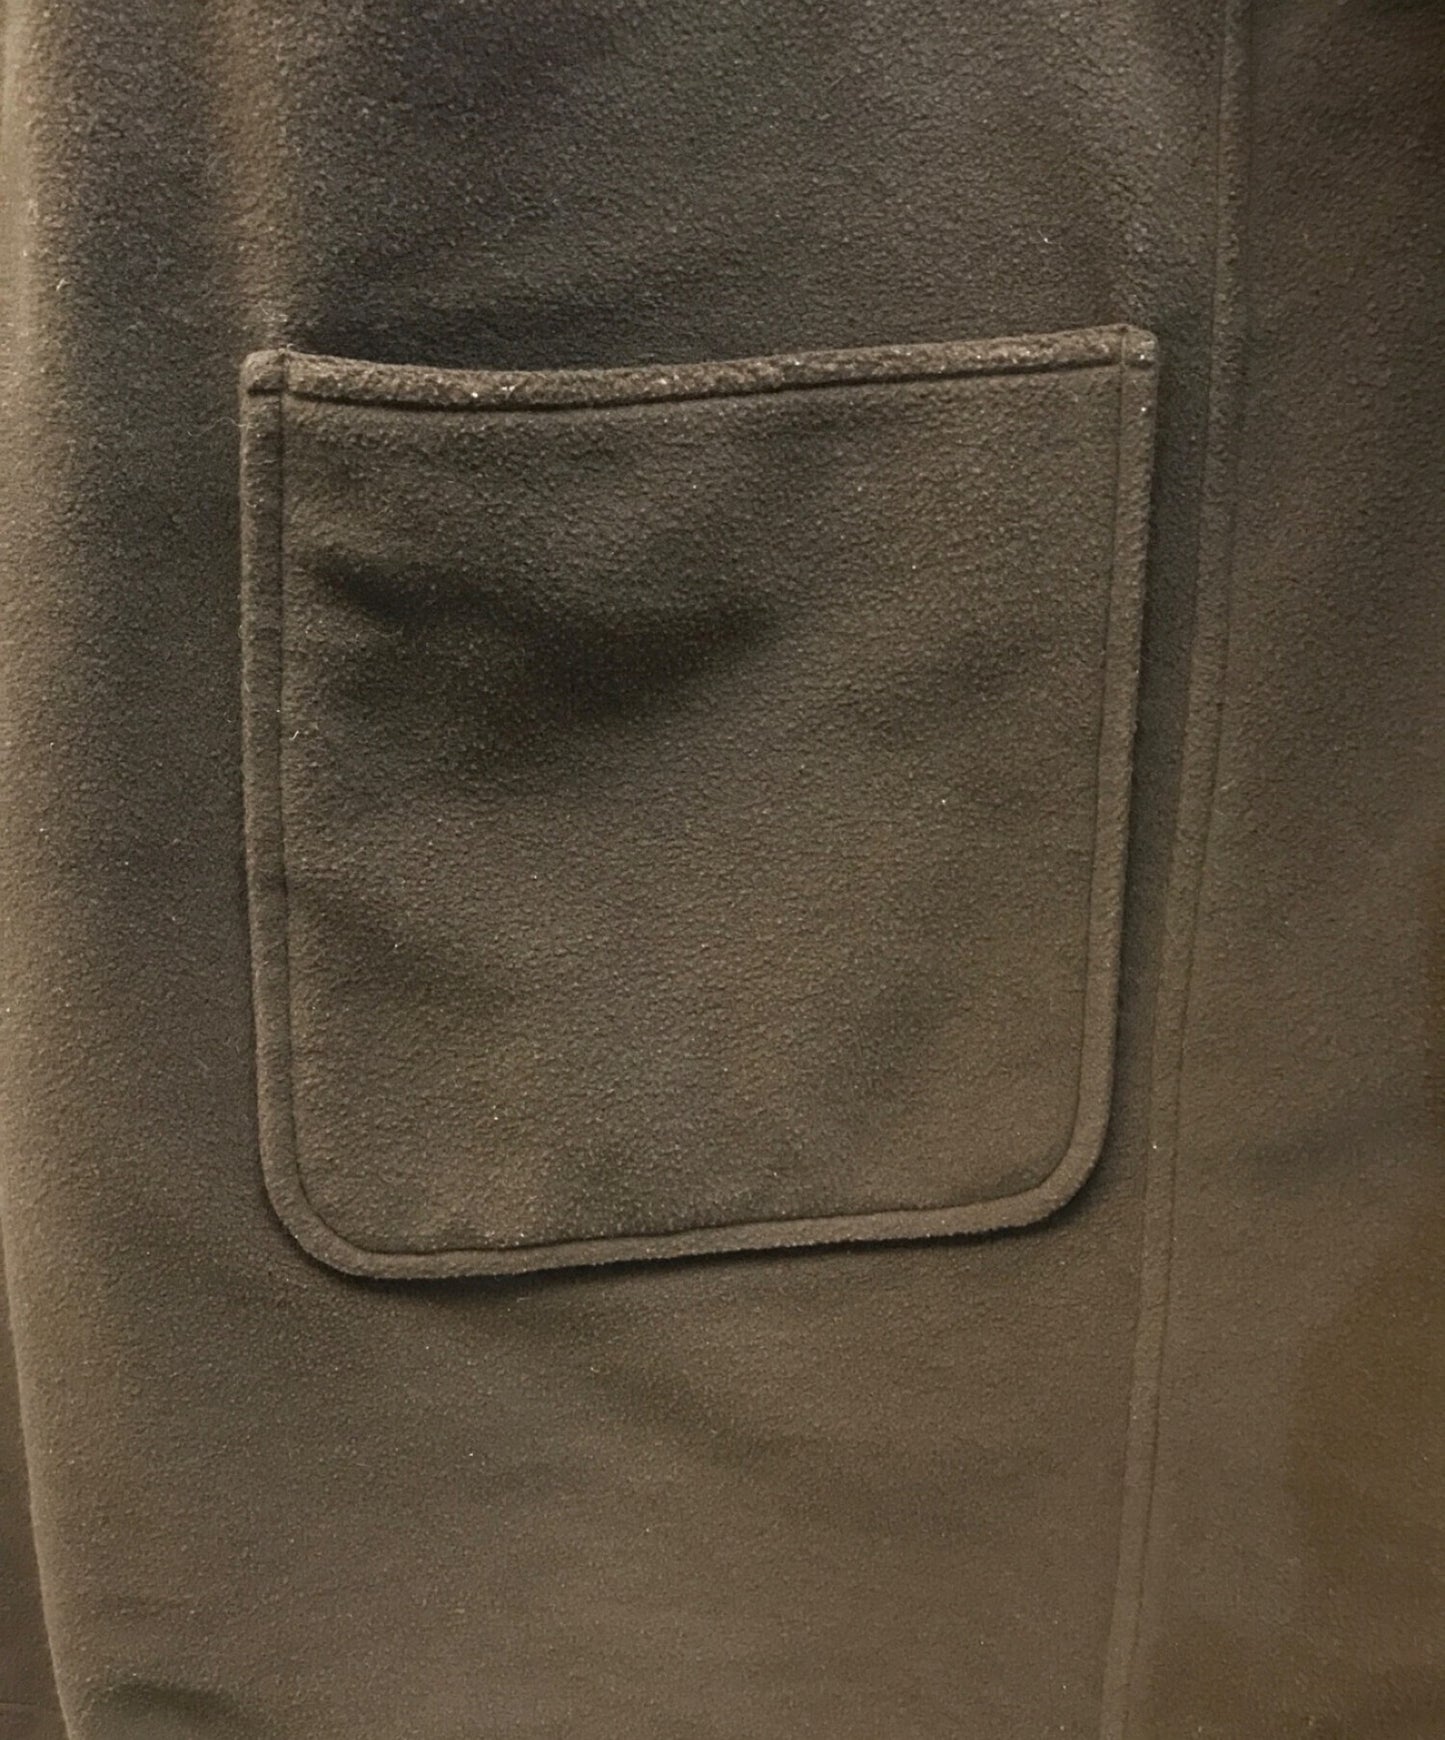 [Pre-owned] ISSEY MIYAKE [OLD] 90s Reversible WIND COAT PL74-FA716